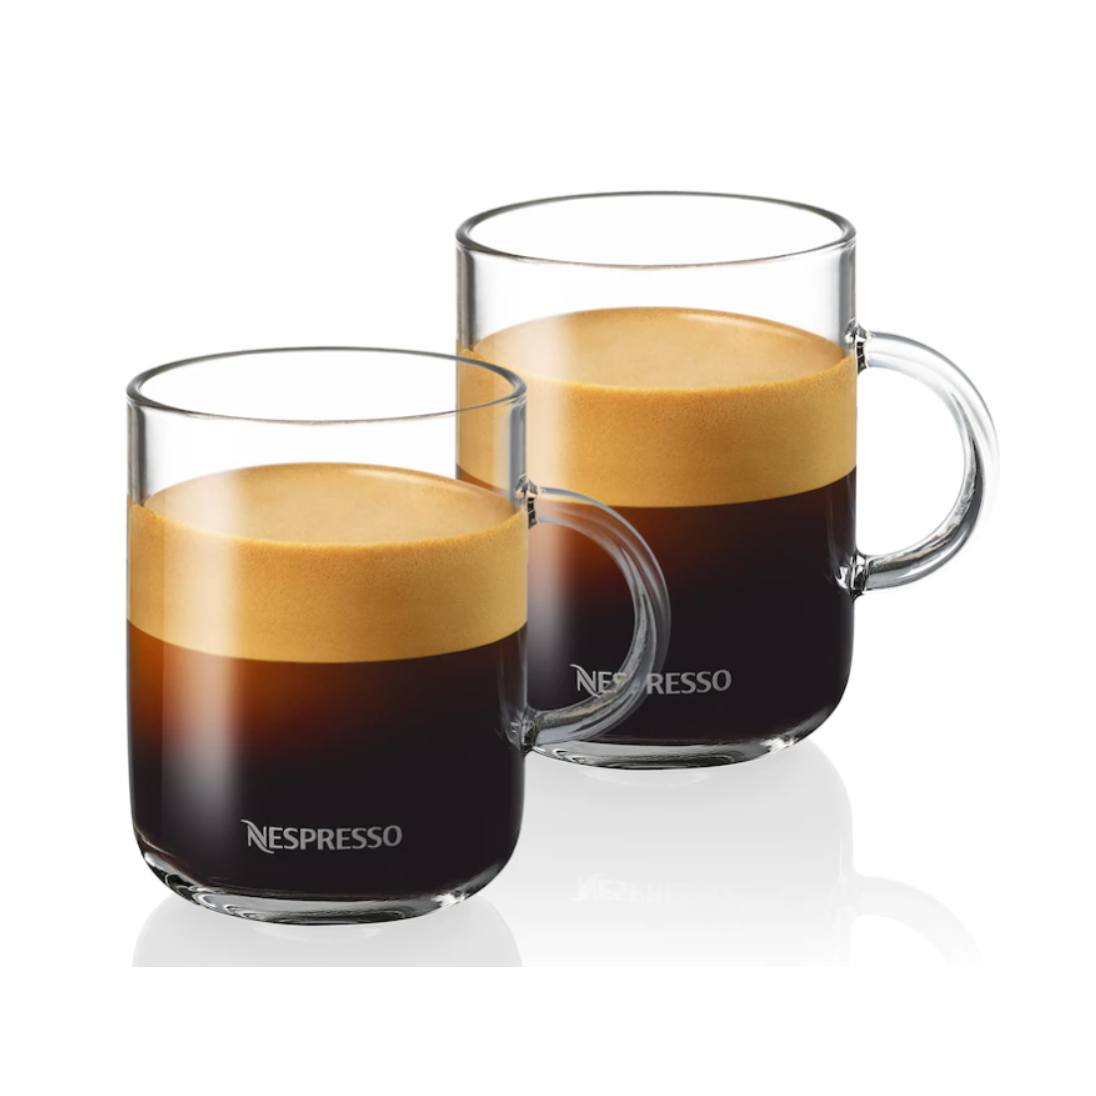 Nespresso: Get a FREE set of cups or mugs with coffee purchase - Clark Deals